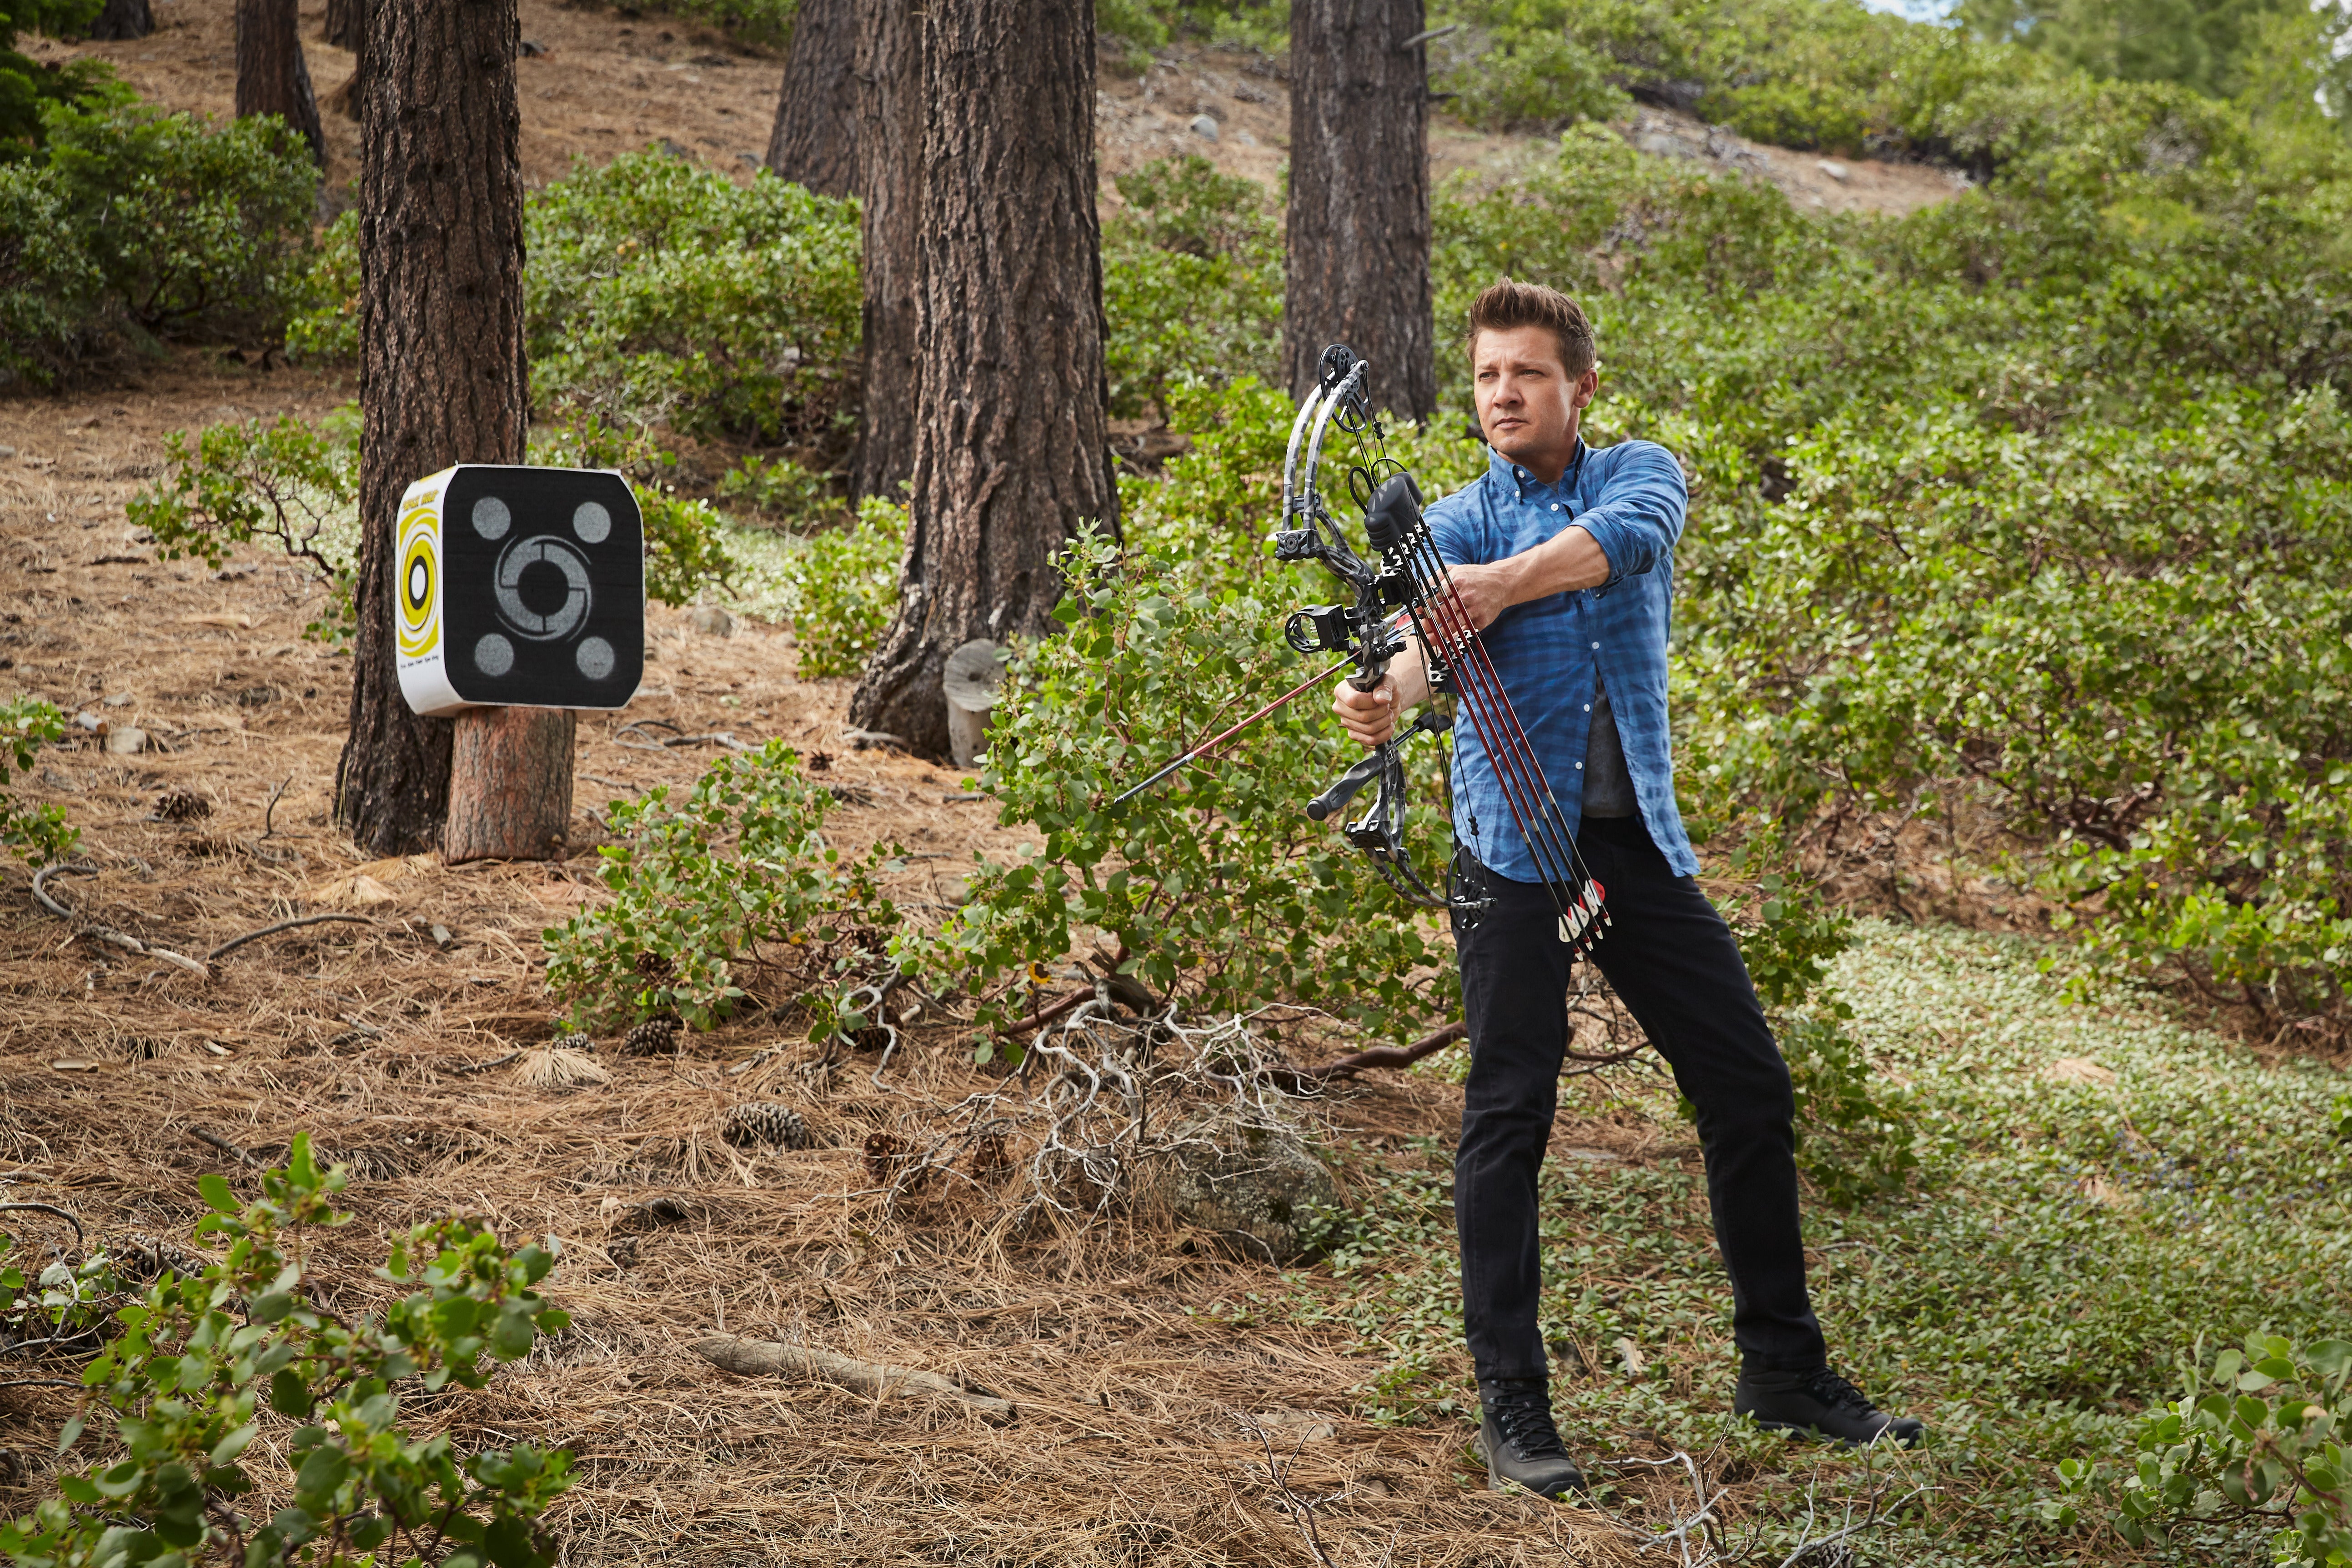 Jeremy Renner holds a bow and arrow, but points them away from a target on a nearby tree.